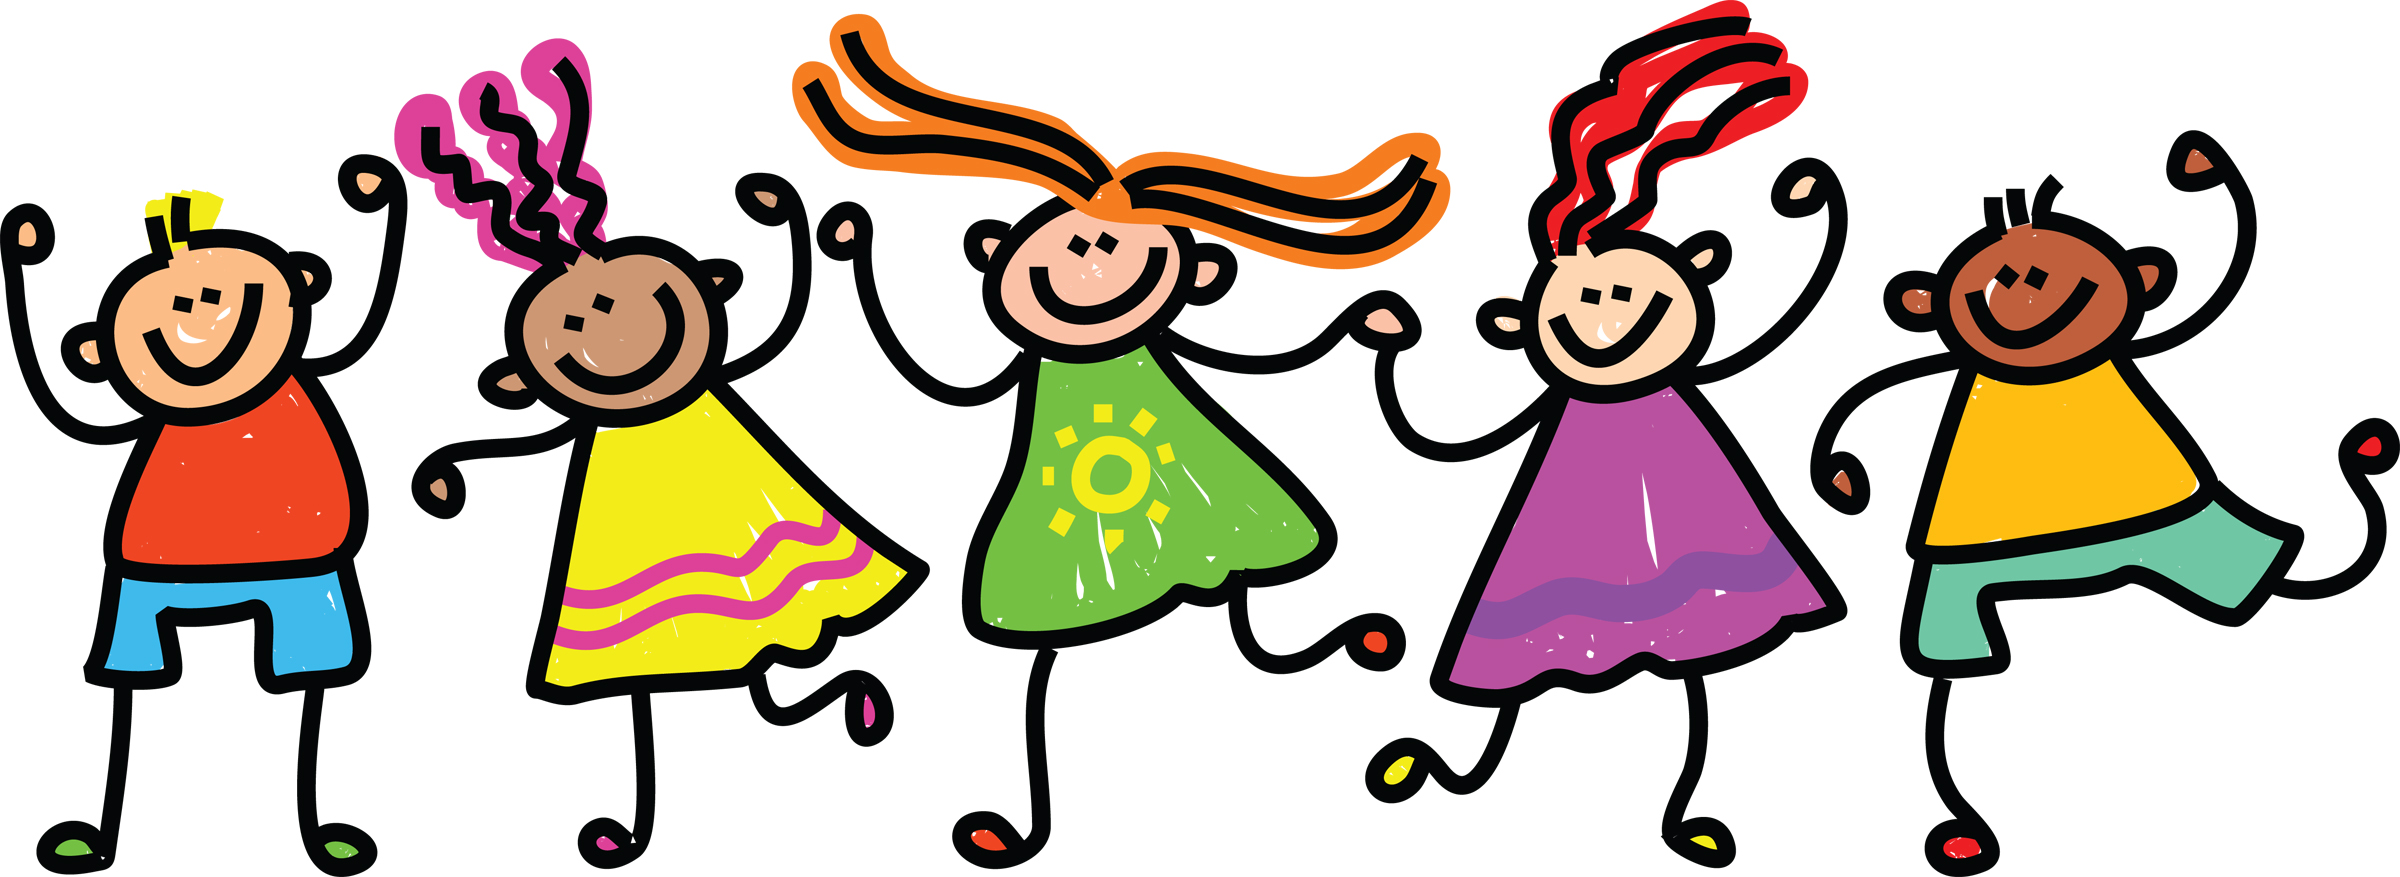 Excited kids clipart free clipart images